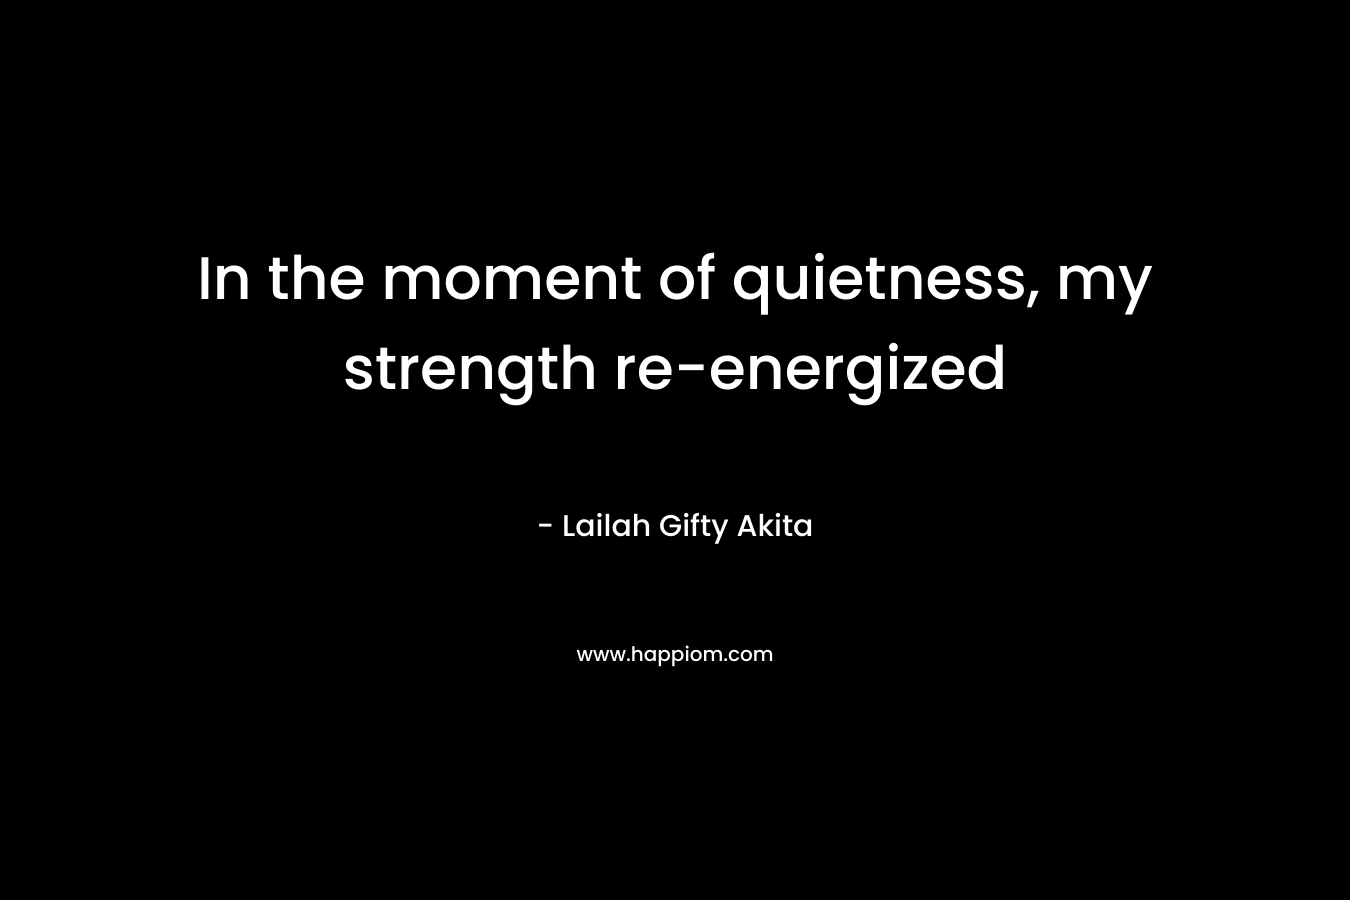 In the moment of quietness, my strength re-energized